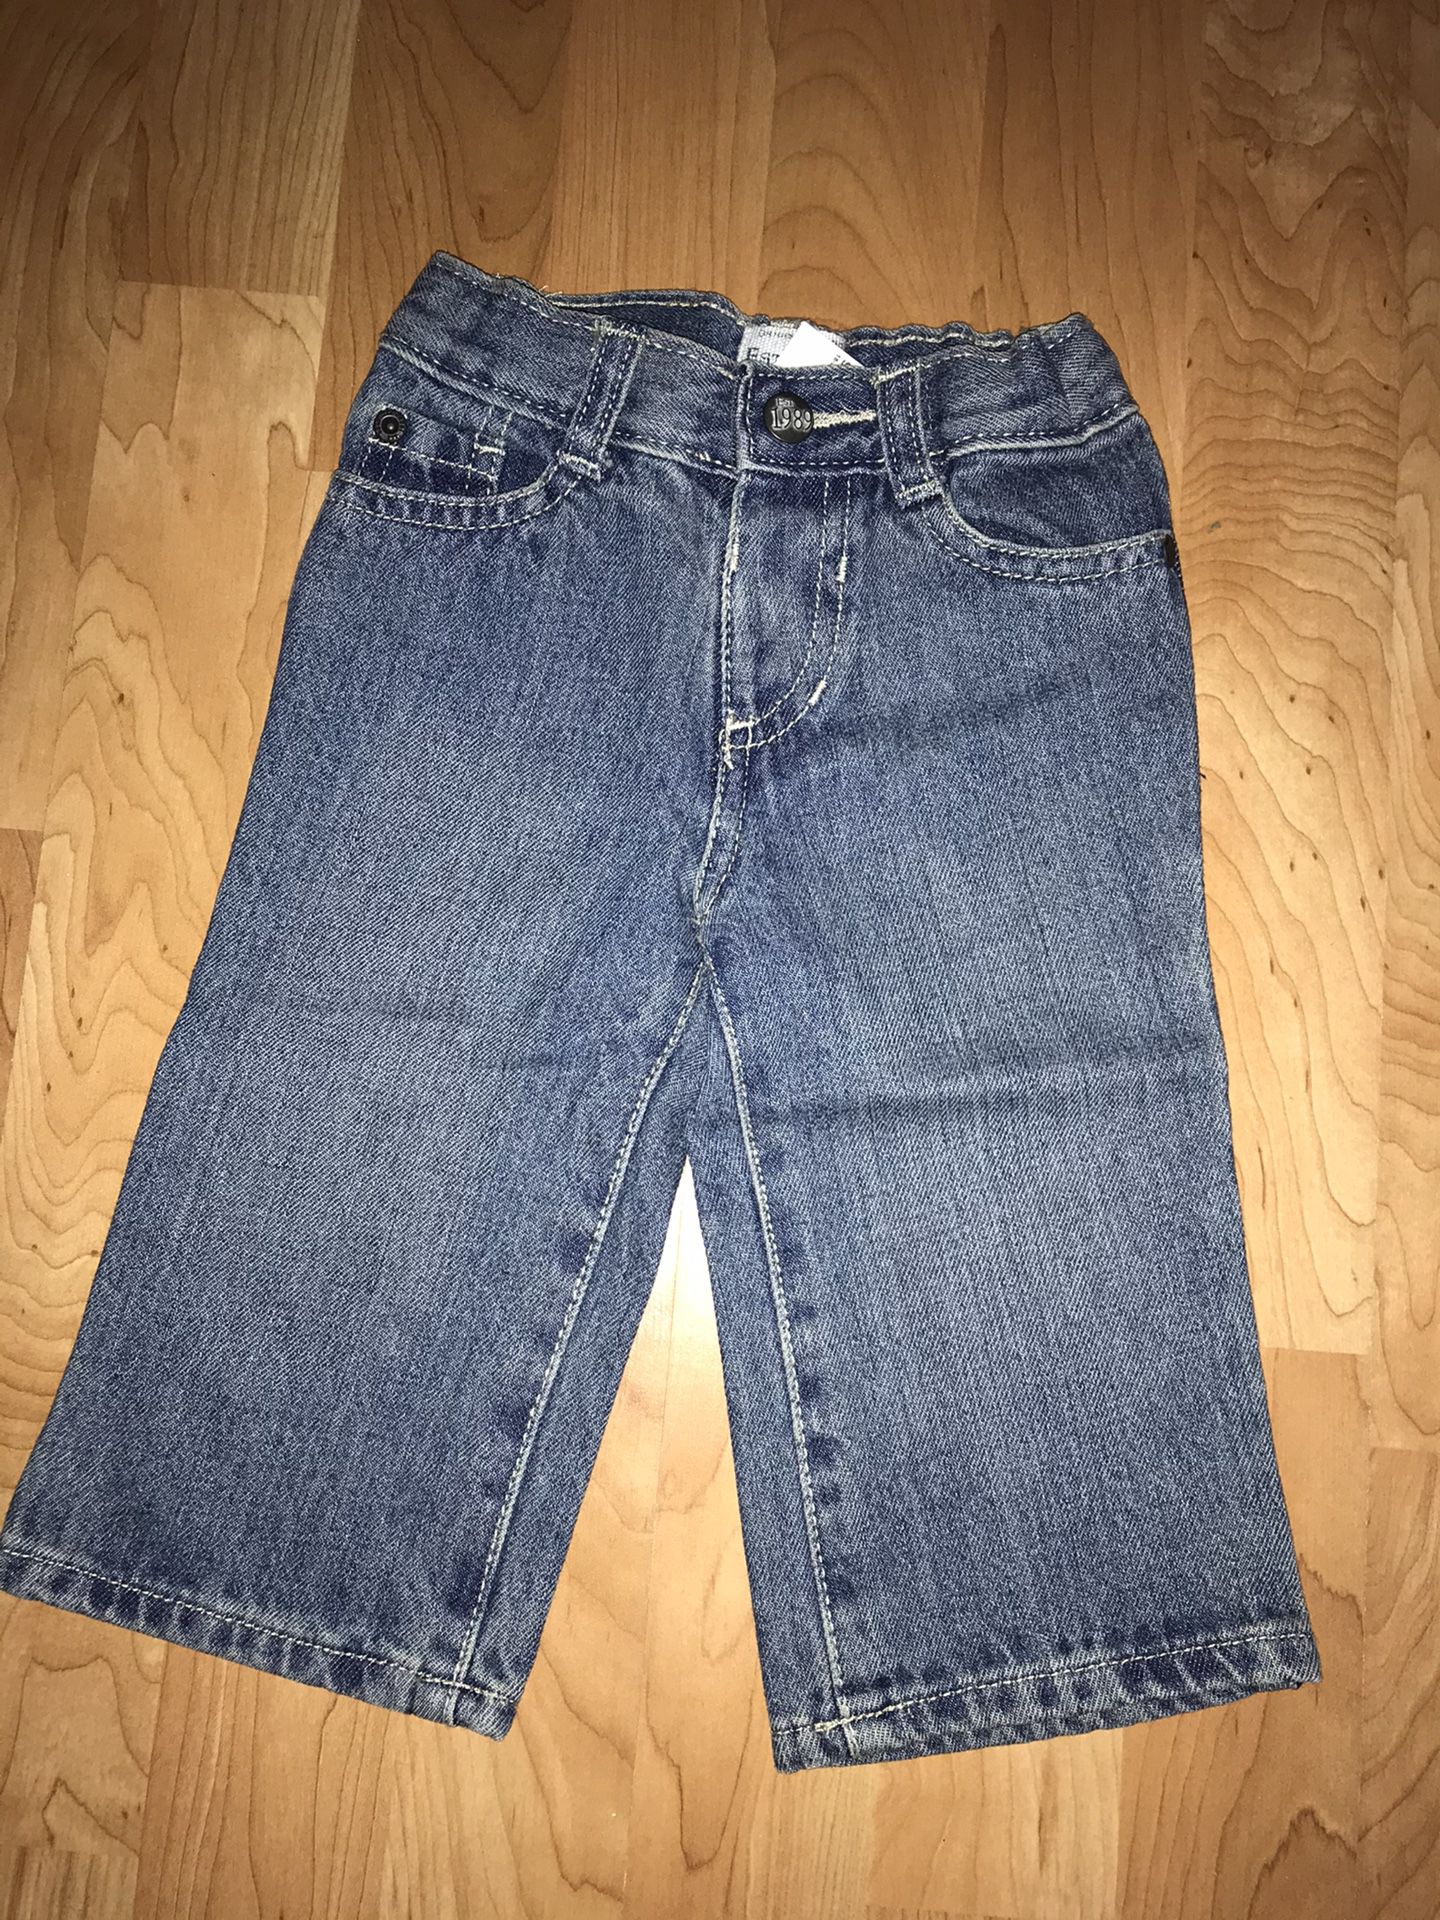 New with tags, The Children’s Place infant boy size 9-12M jeans, riverwash color